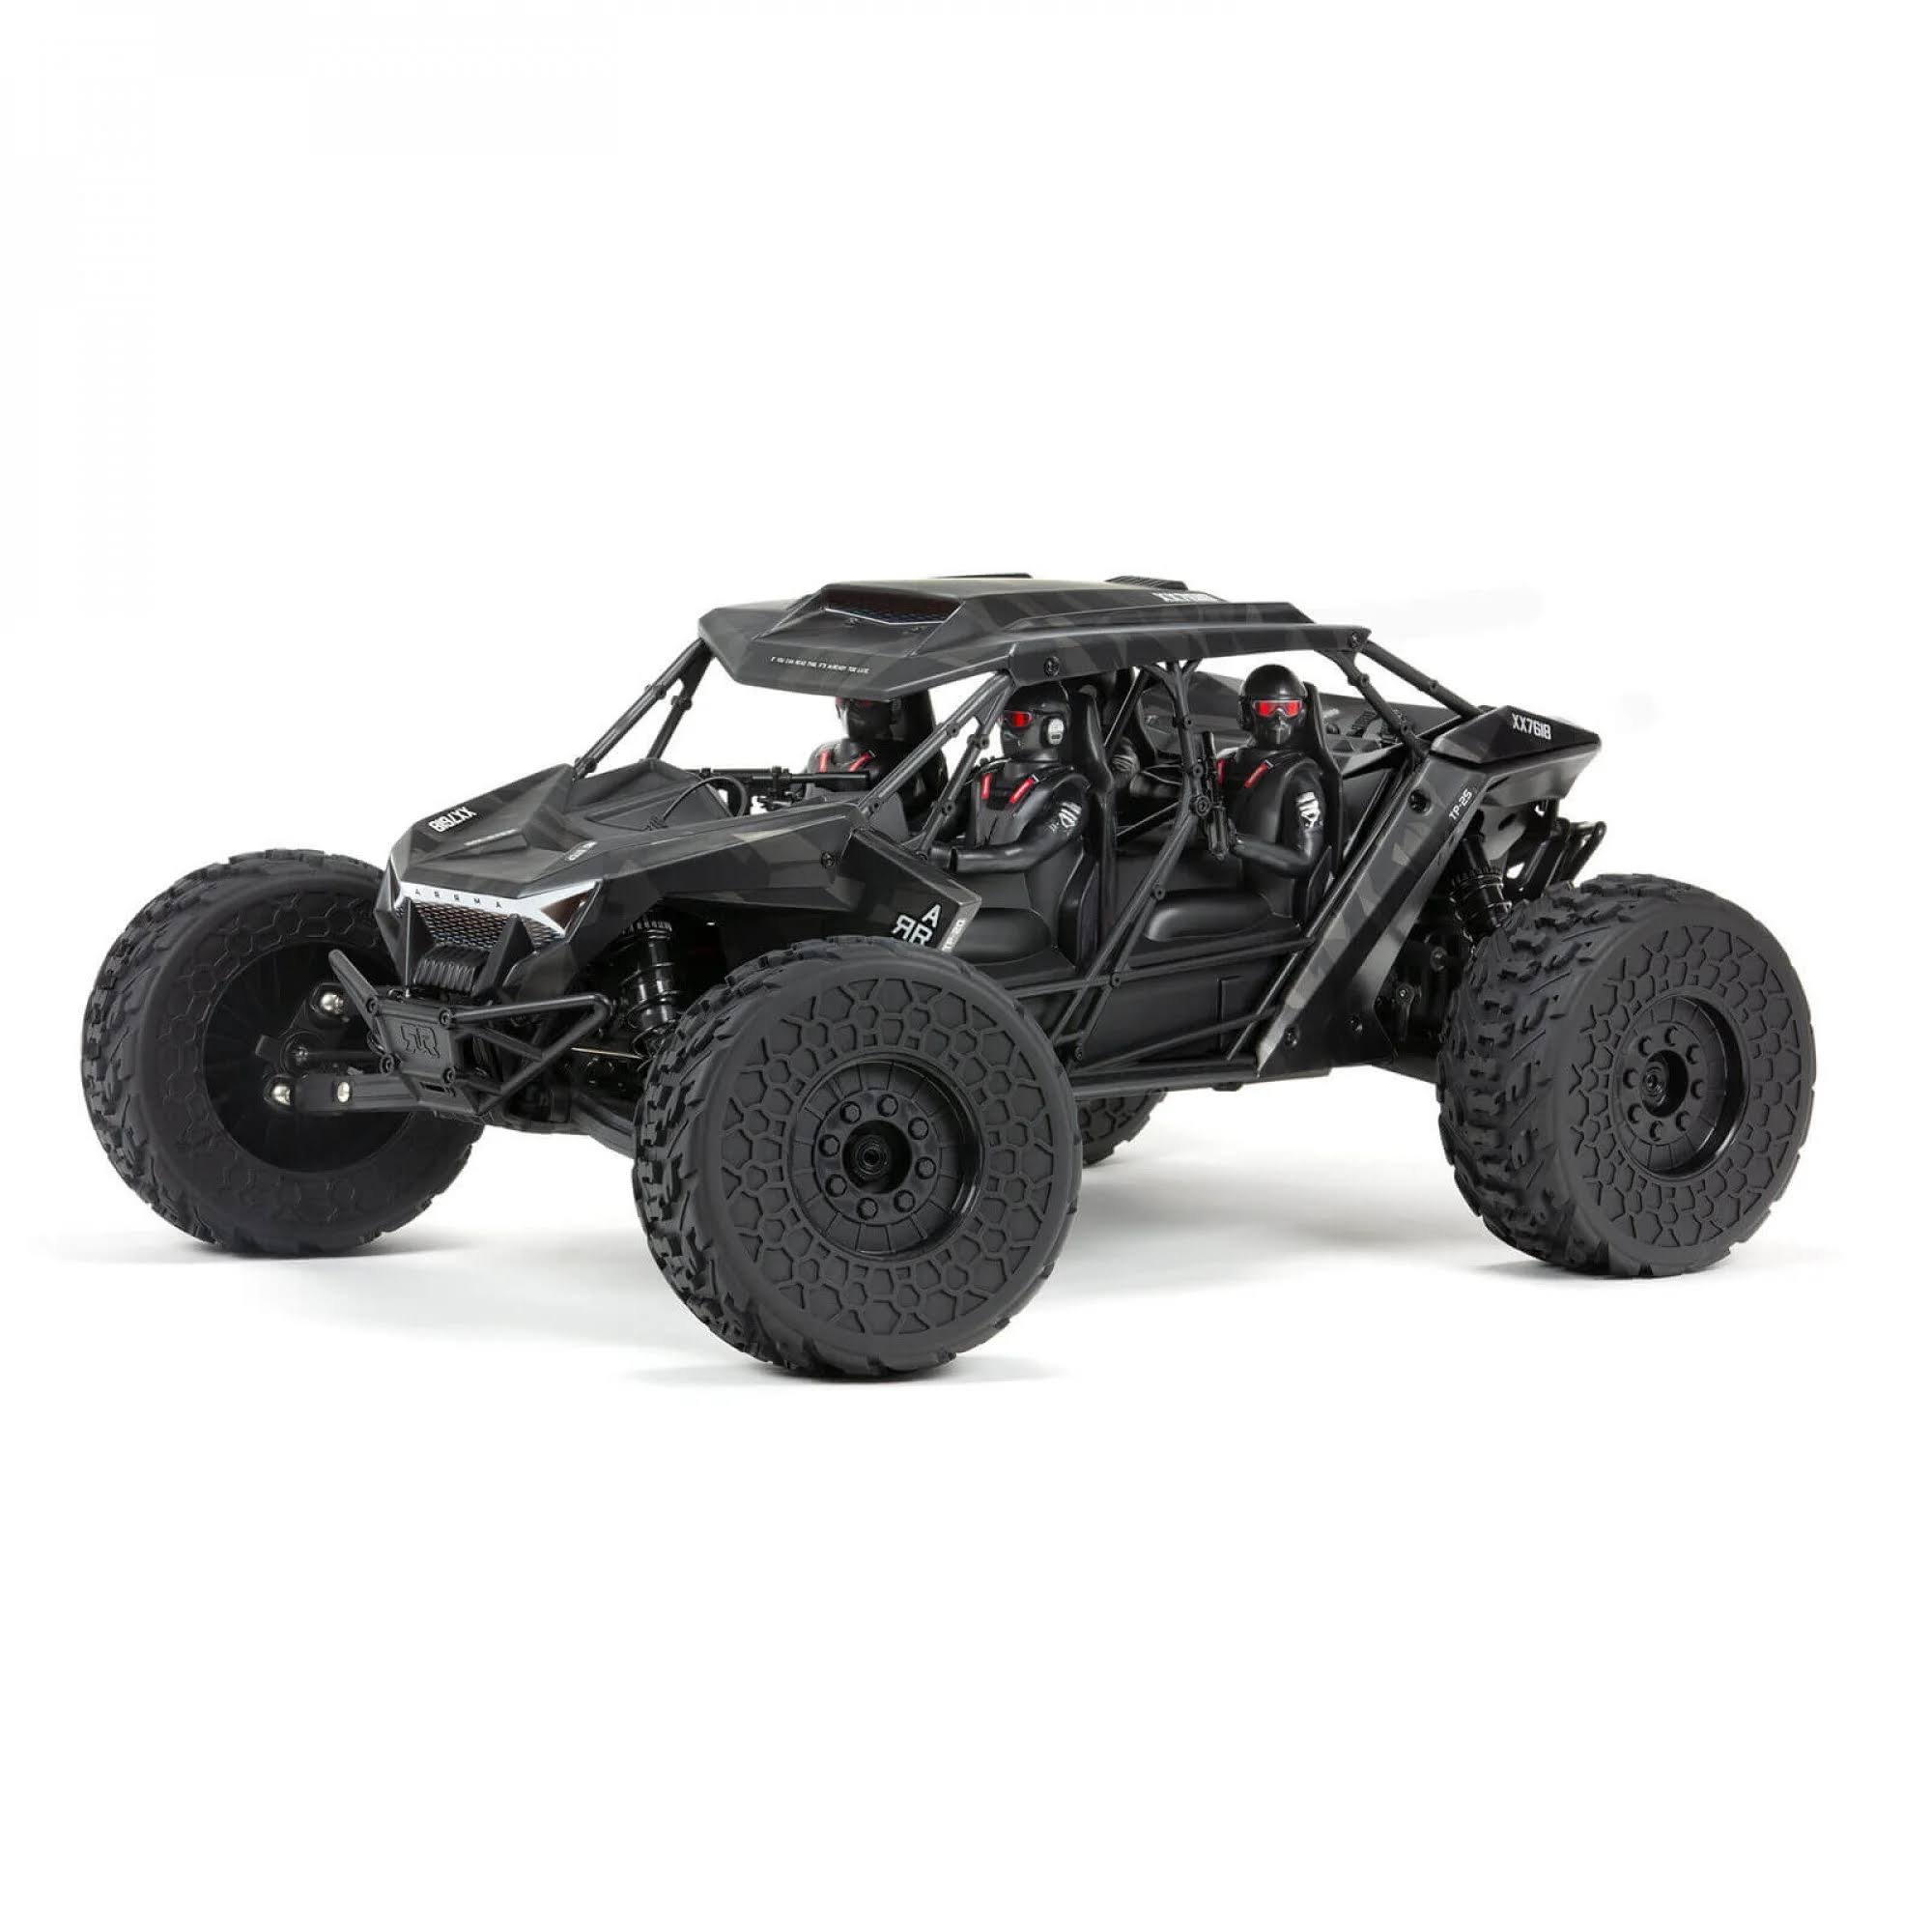 ARRMA RC Truck 1/7 FIRETEAM 6S 4WD BLX Speed Assault Vehicle RTR (Batteries and Charger Not Included), ARA7618T1